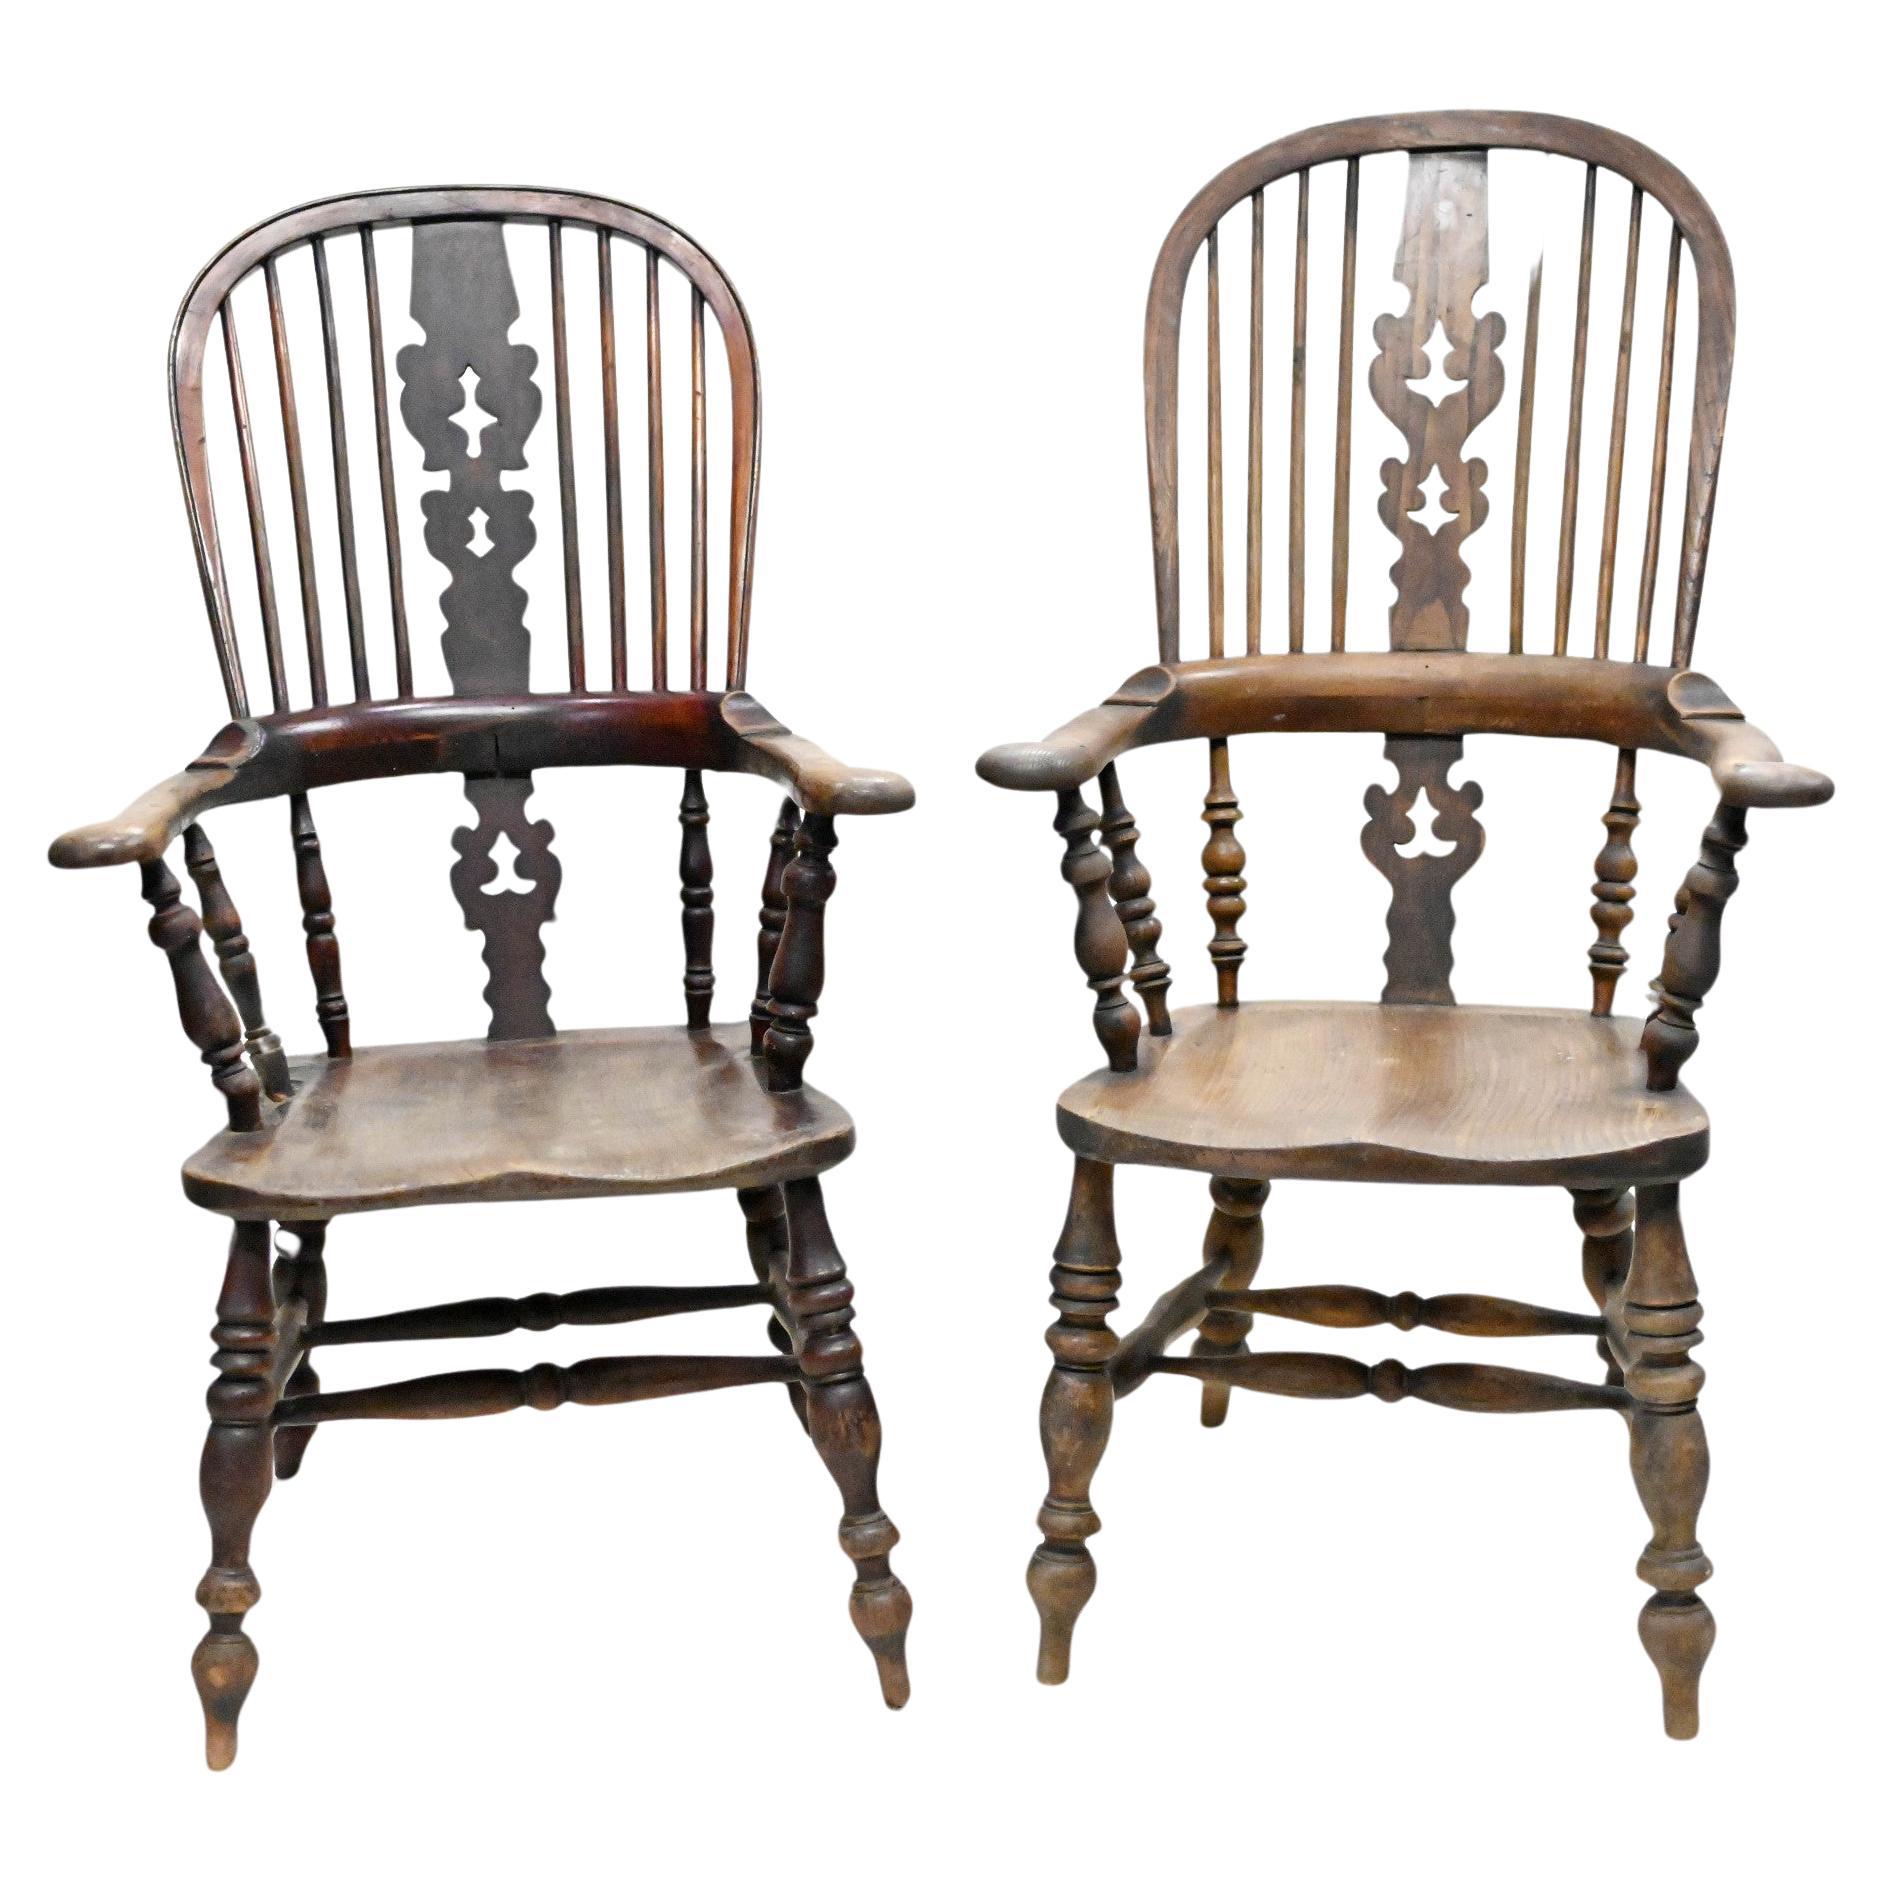 Windsor-Sessel aus Eiche, His and Hers, 1860, Paar im Angebot